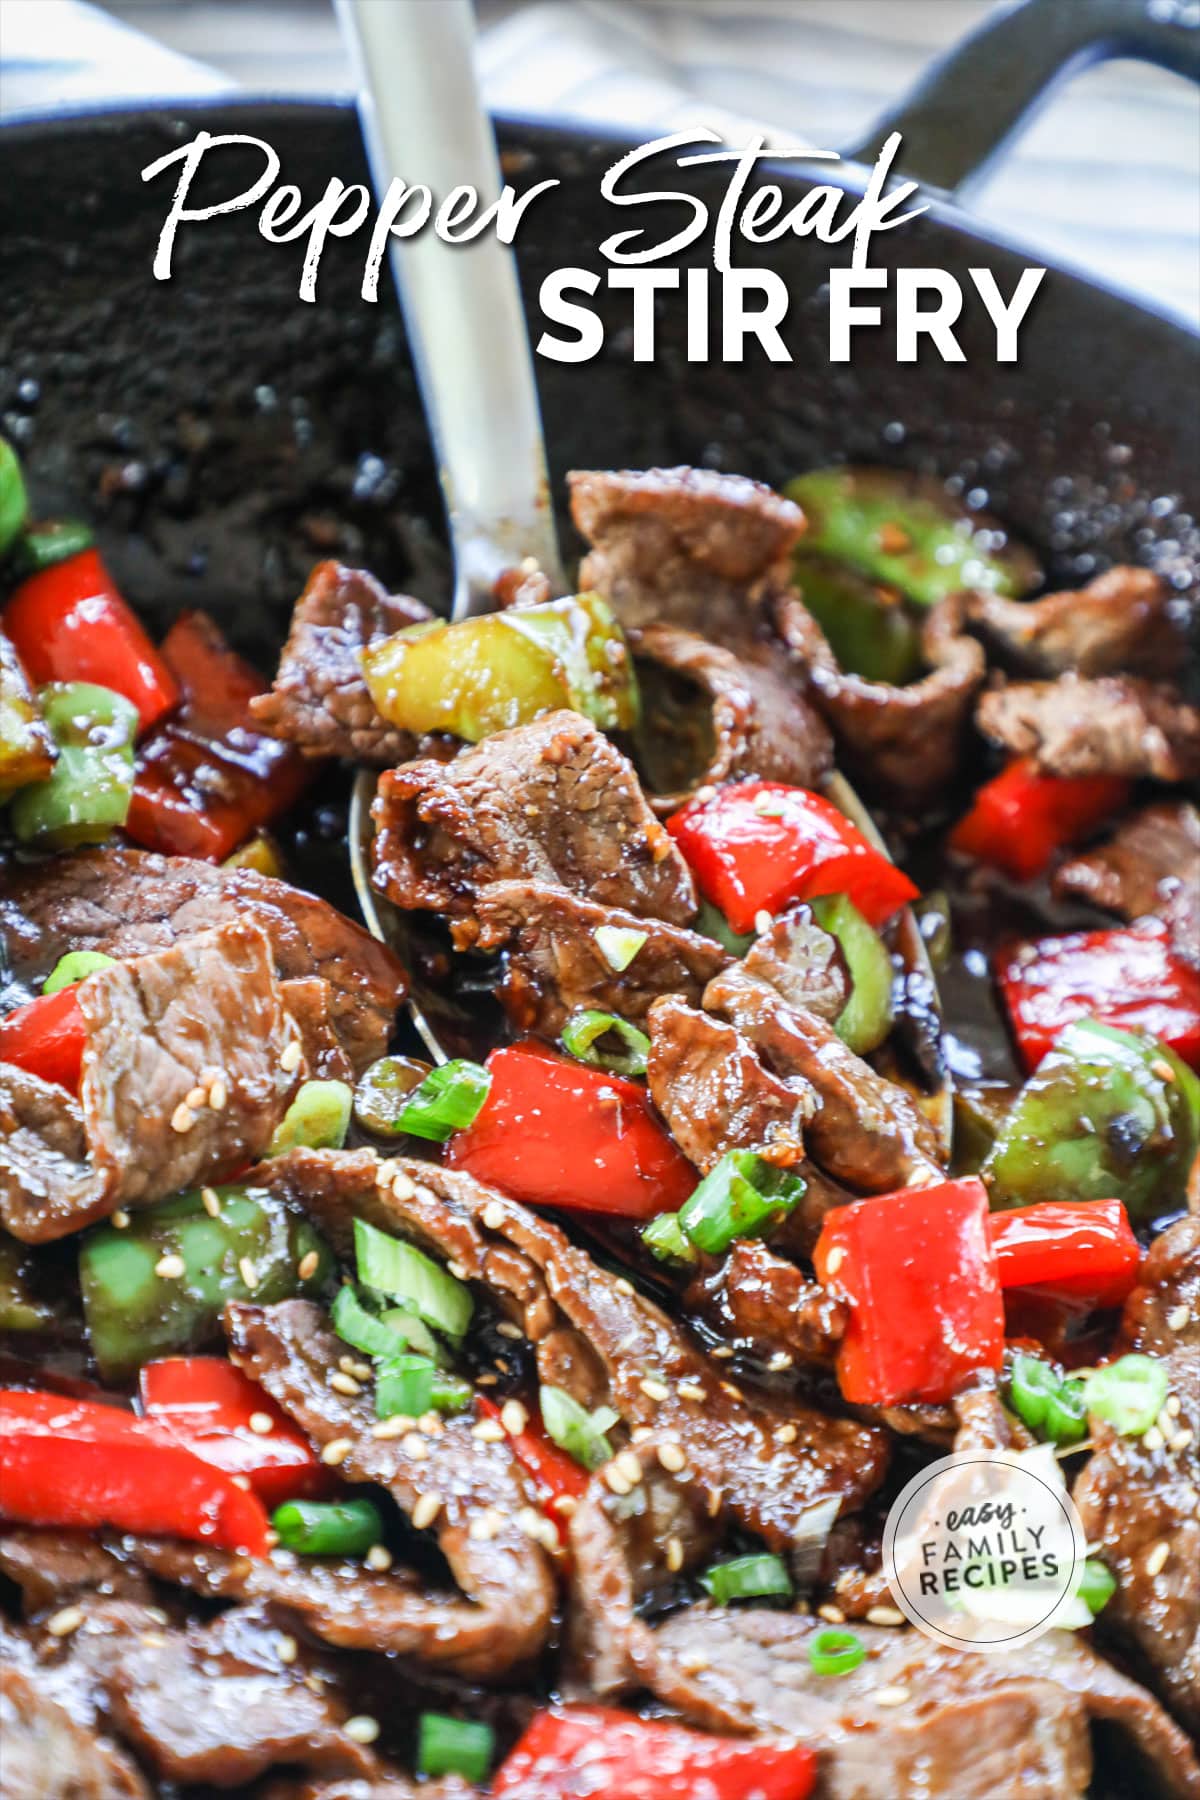 A metal spoon scooping stir fried steak with red and green peppers from a large black pan.